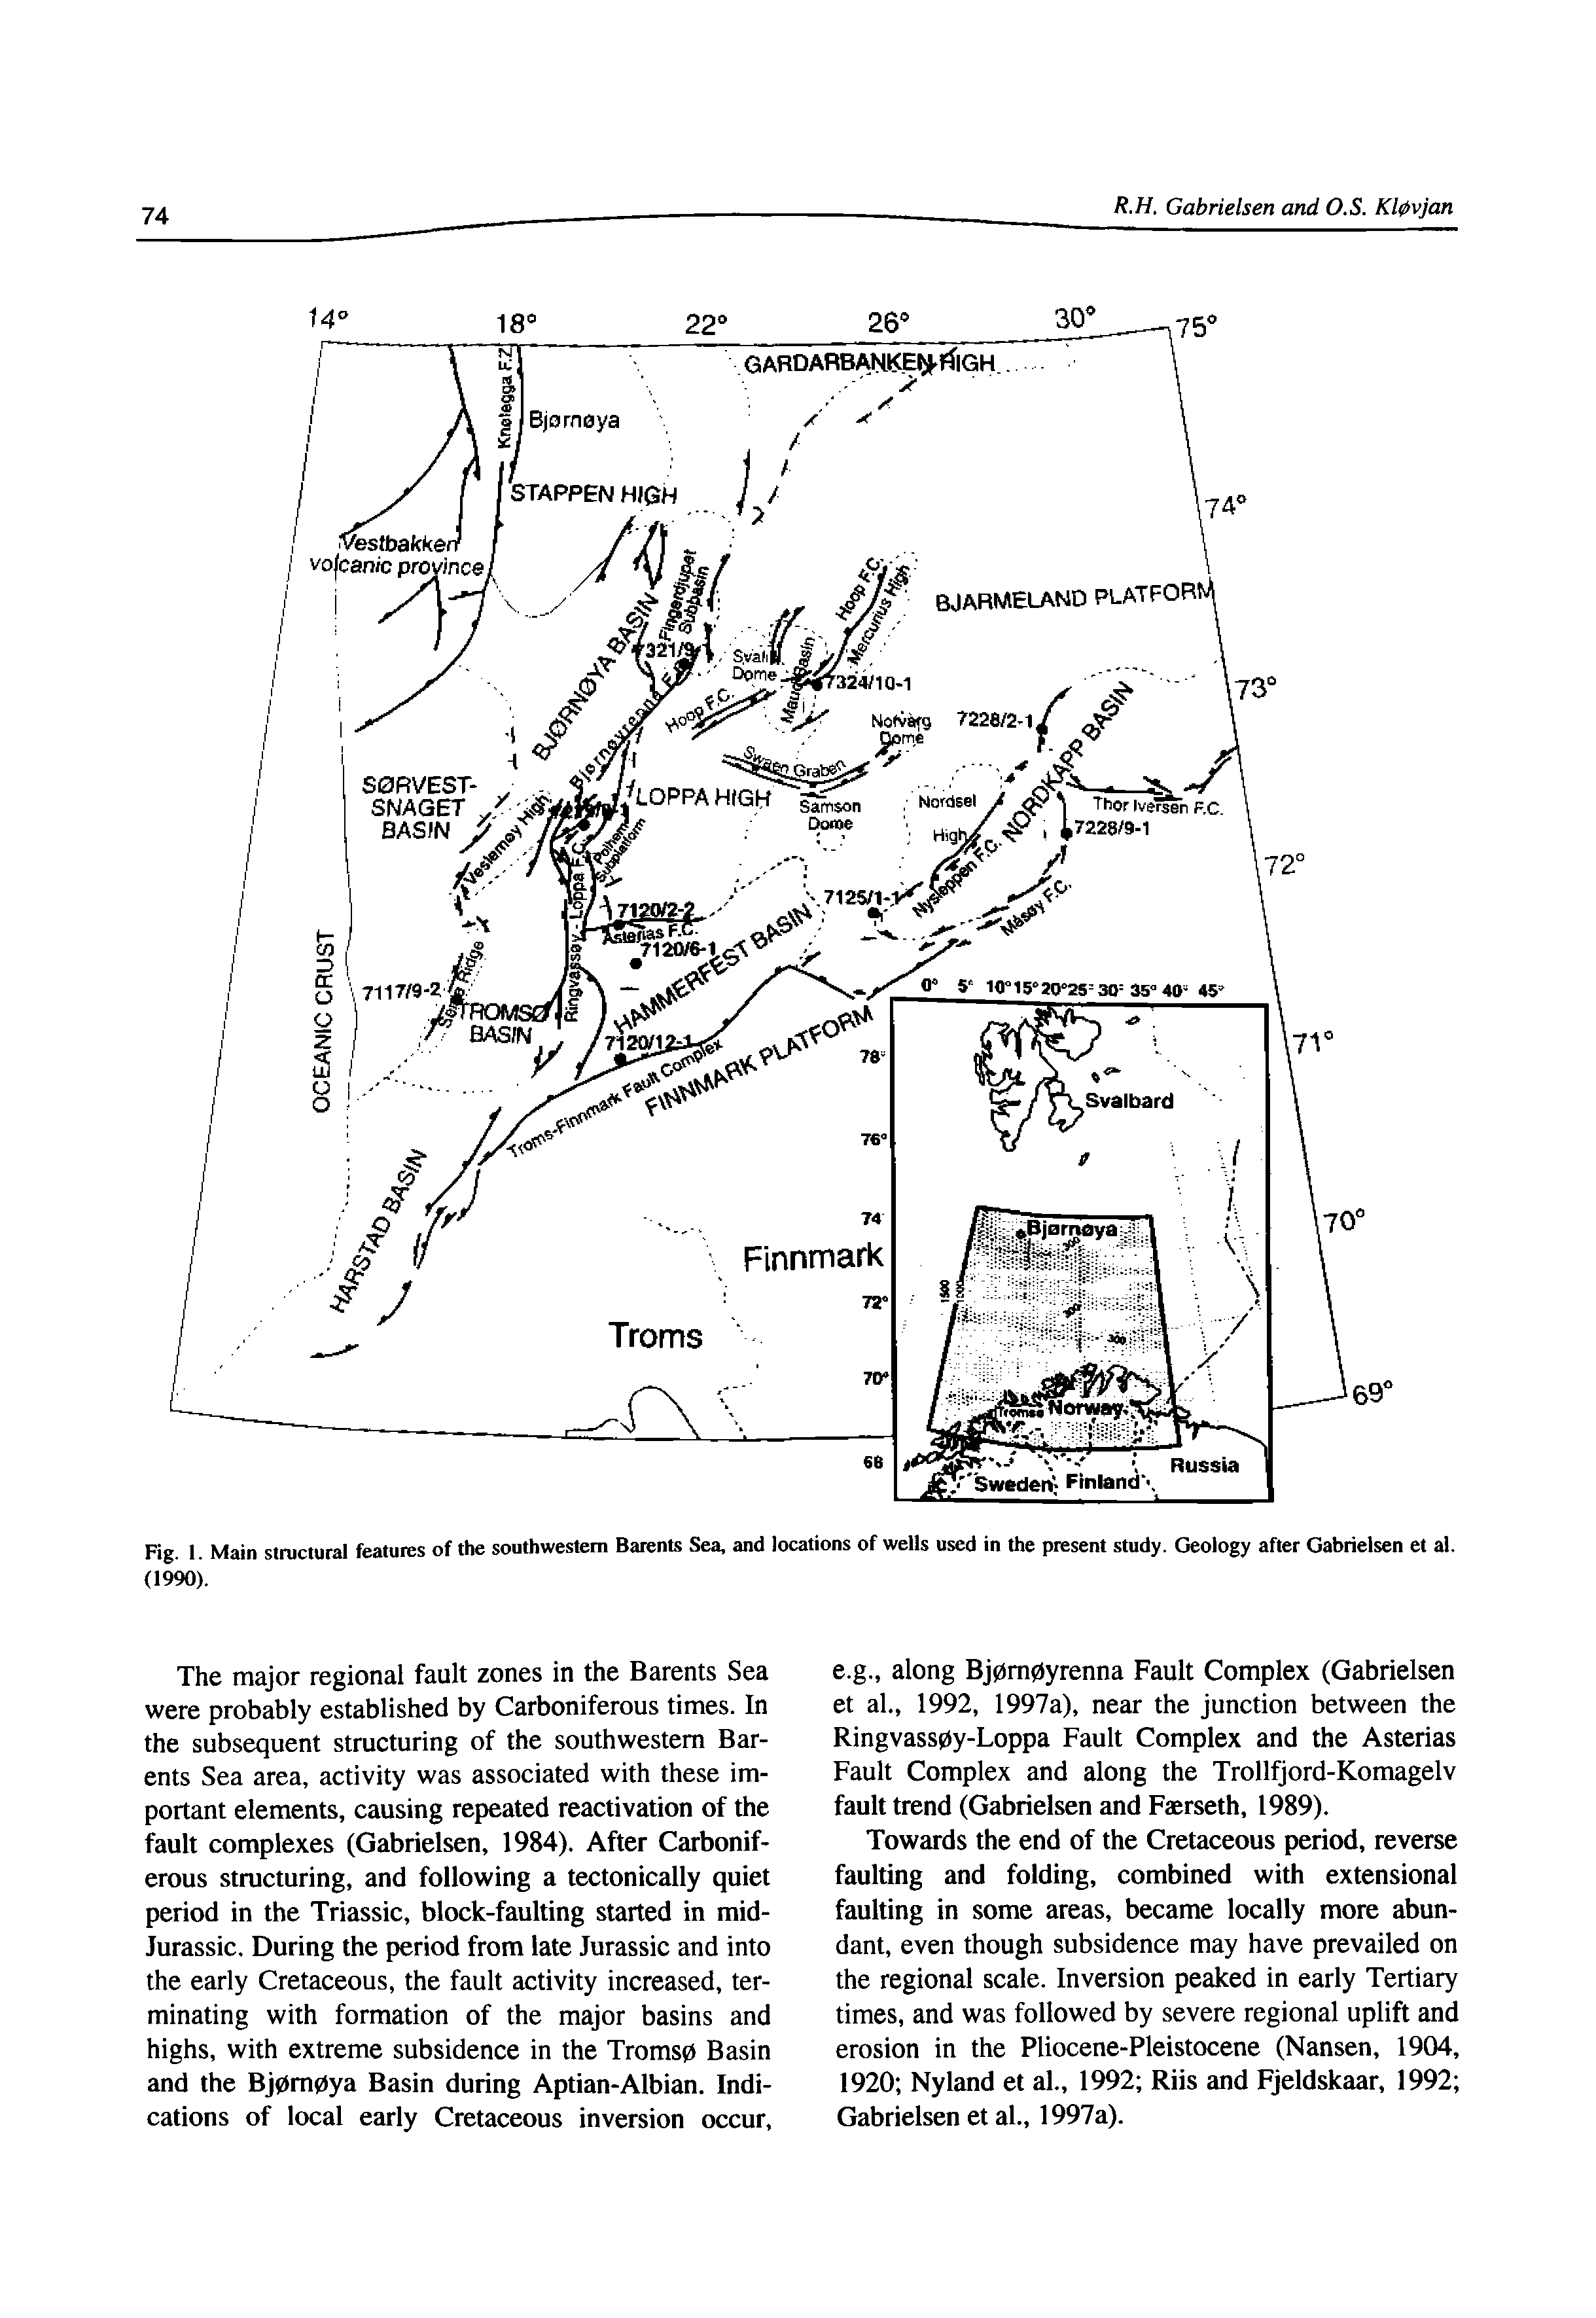 Fig. 1. Main structural features of the southwestern Barents Sea, and locations of wells used in the present study. Geology after Gabrielsen et al. (1990).